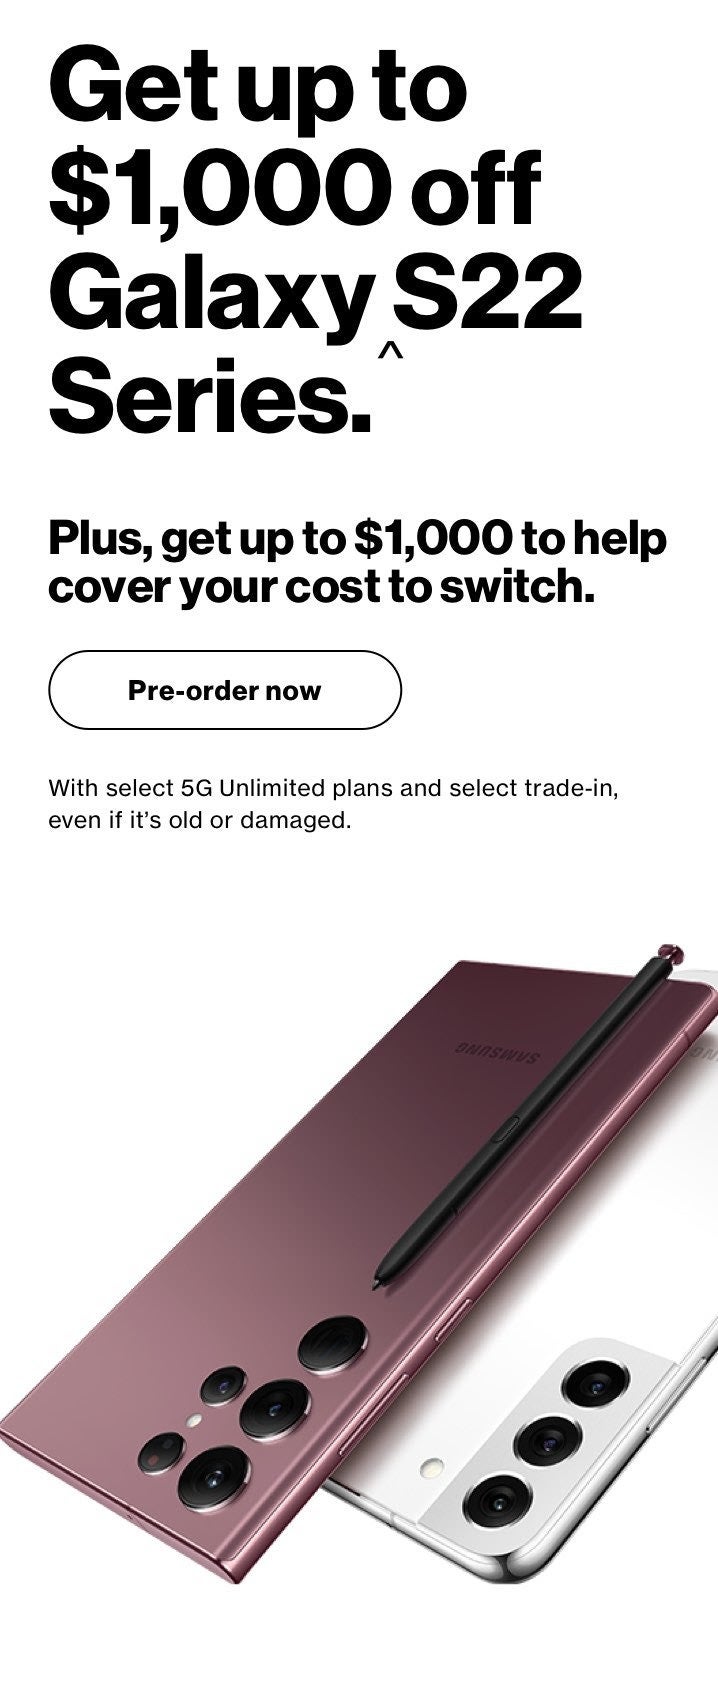 Leaked mock up of Verizon webpage allegedly reveals carrier's Galaxy S22 trade-in offer - Major leak reveals Verizon's trade-in deal for 5G Galaxy S22 line offering up to $1K off